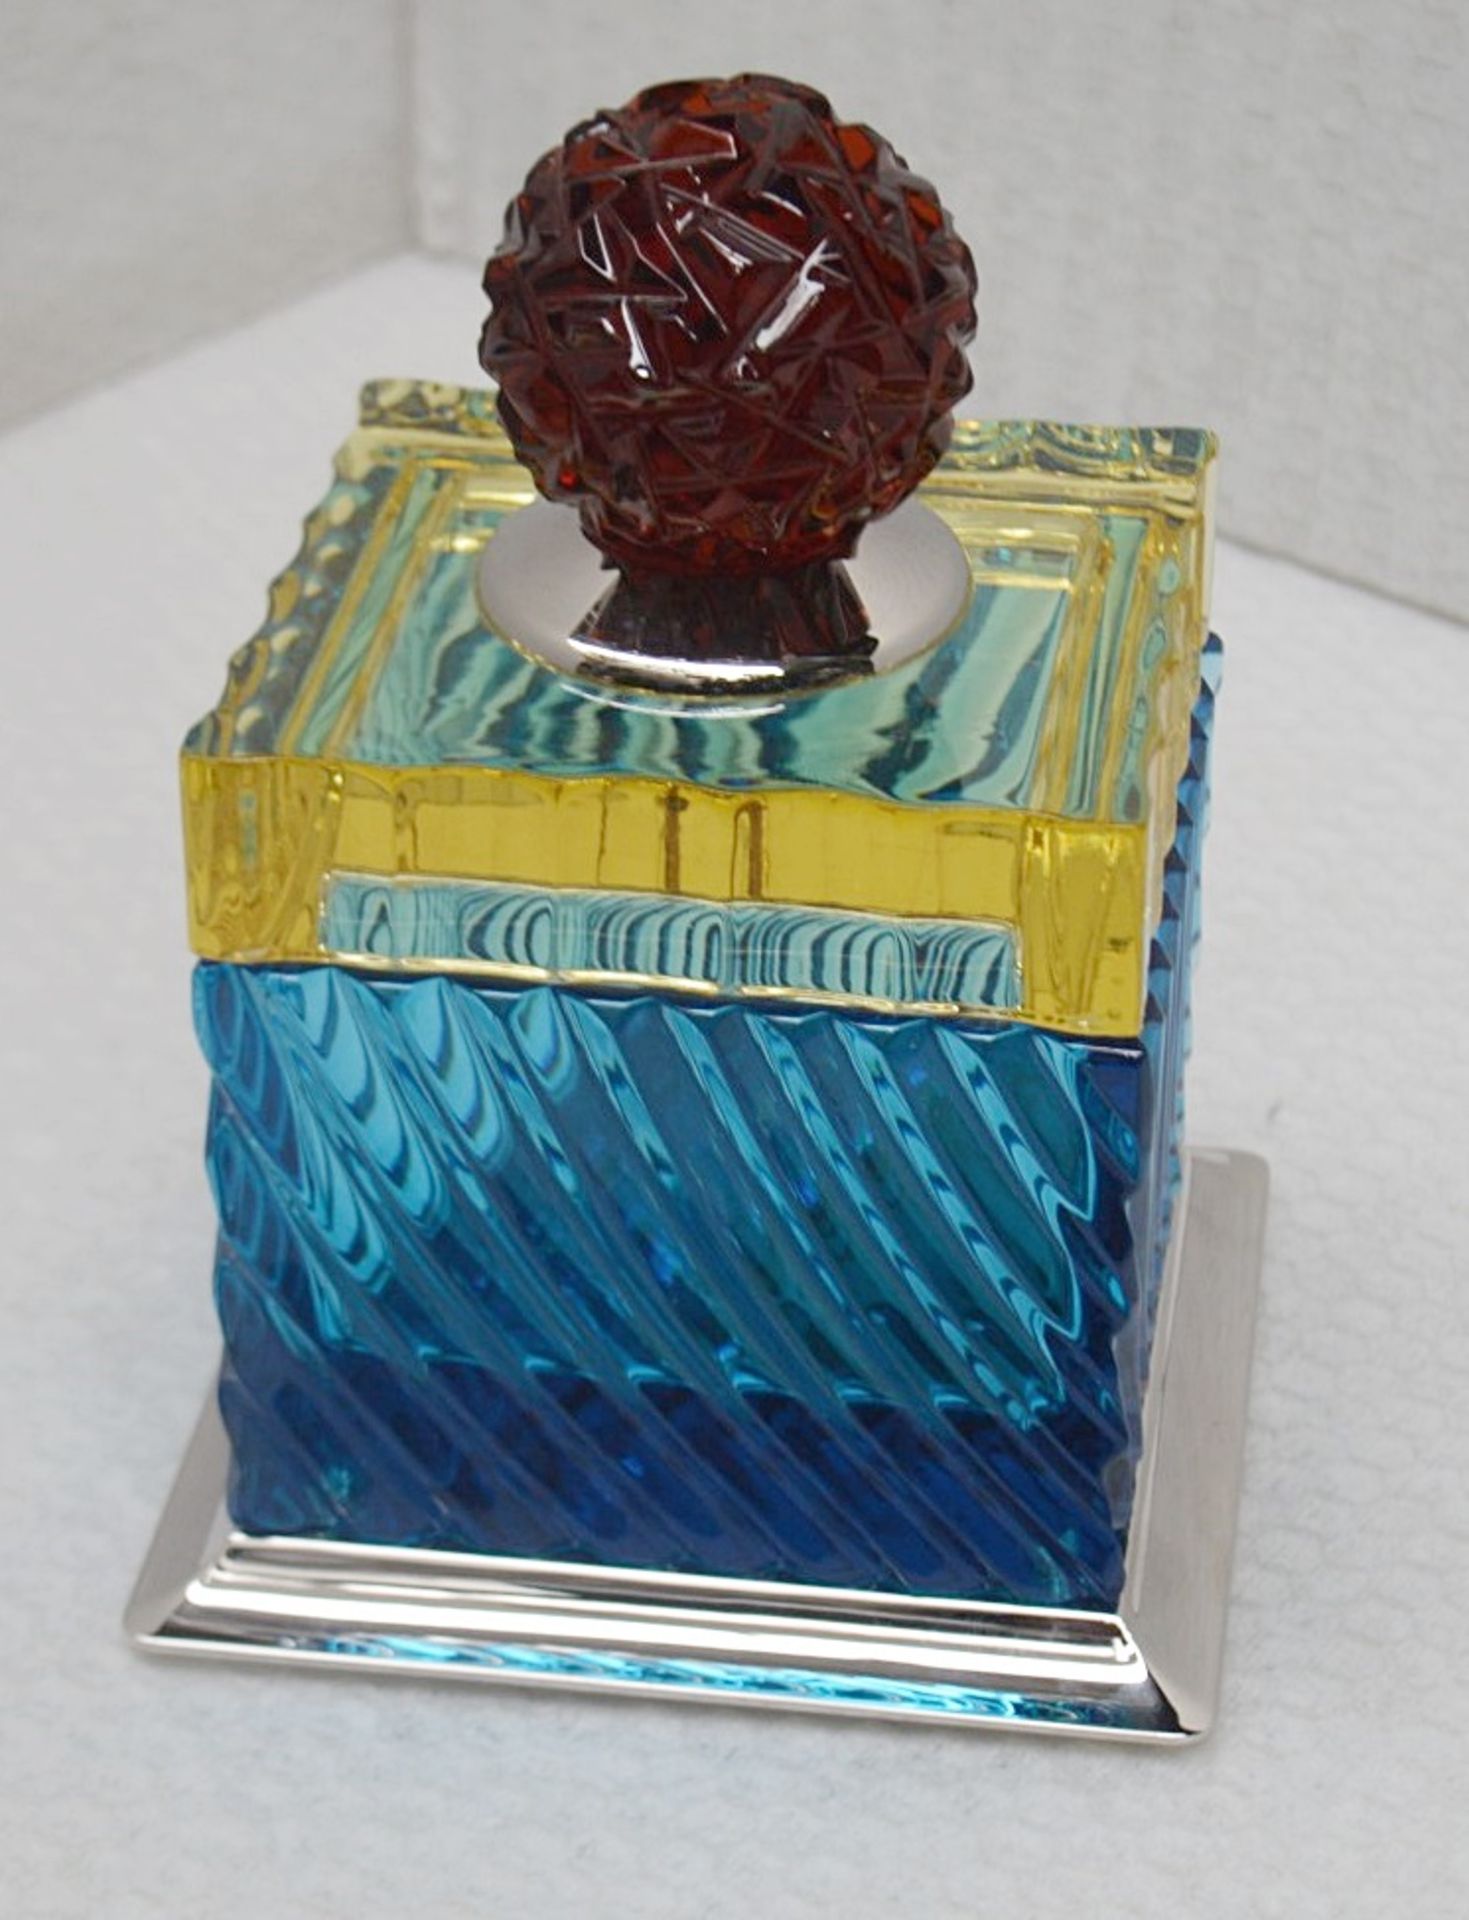 1 x BALDI 'Home Jewels' Italian Hand-crafted Artisan Crystal Box In Blue & Yellow, With A